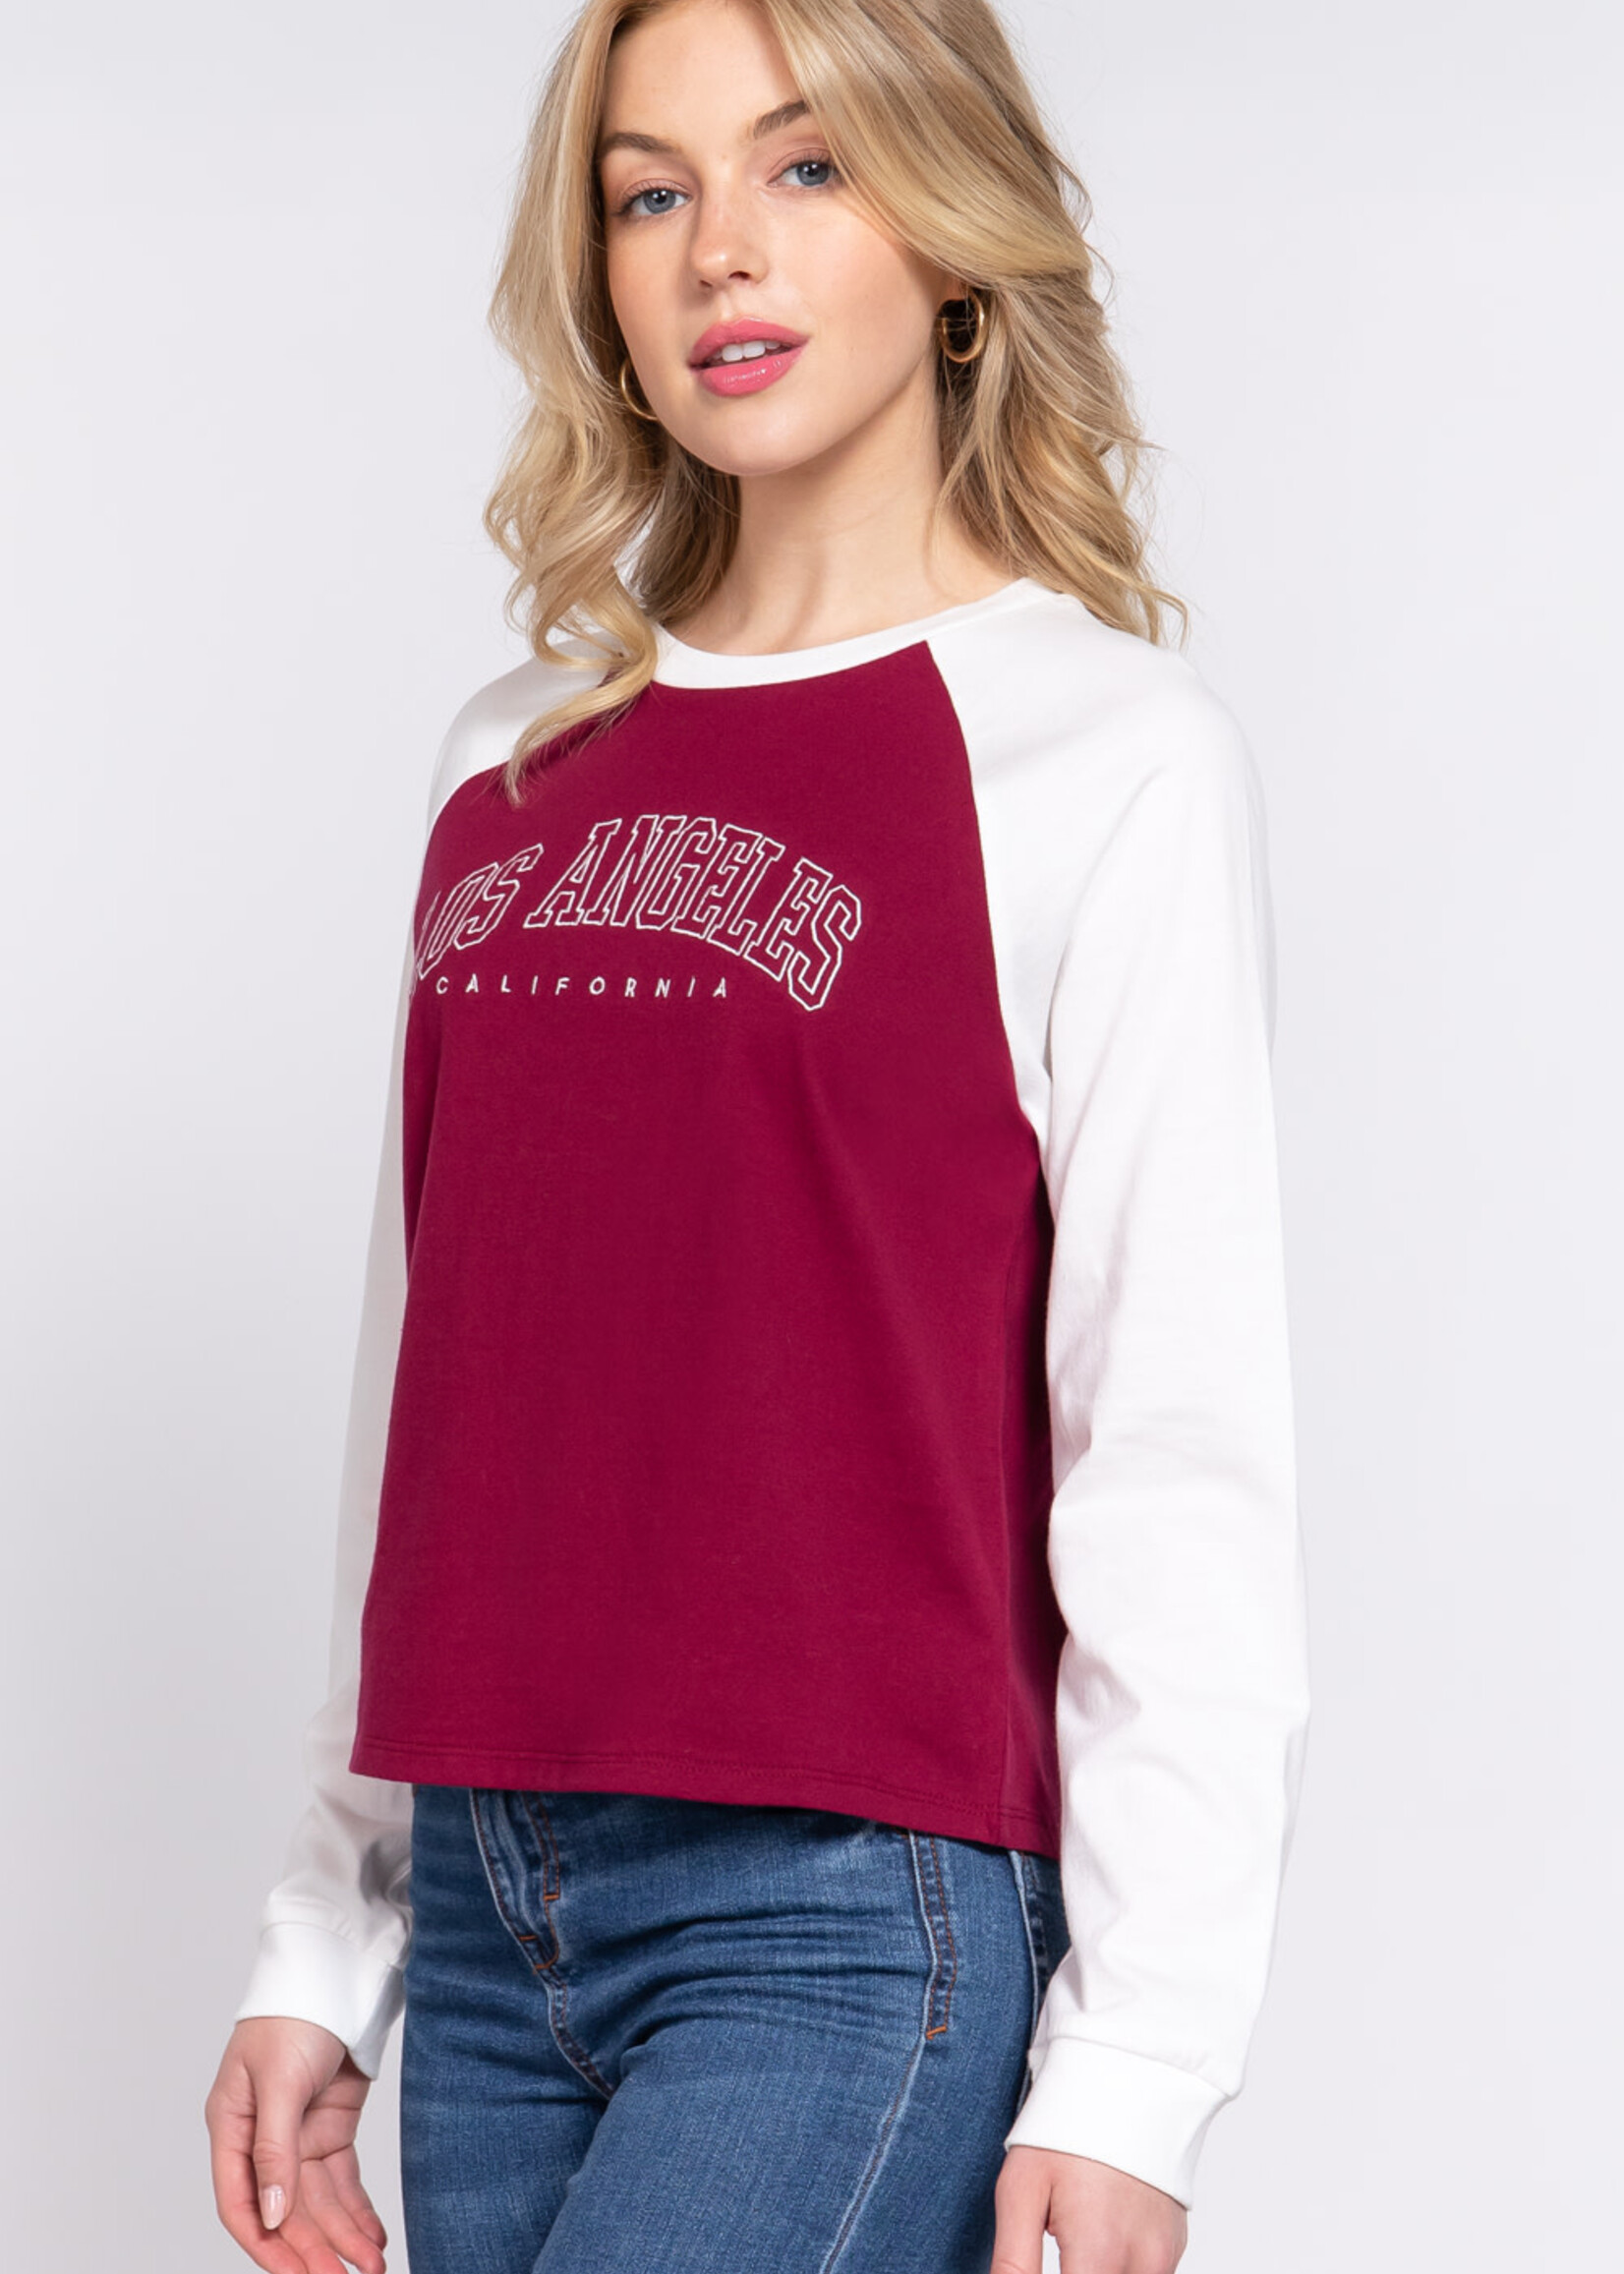 ACTIVE USA, INC. Long Sleeve Los Angeles Embo Knit Top - T13601